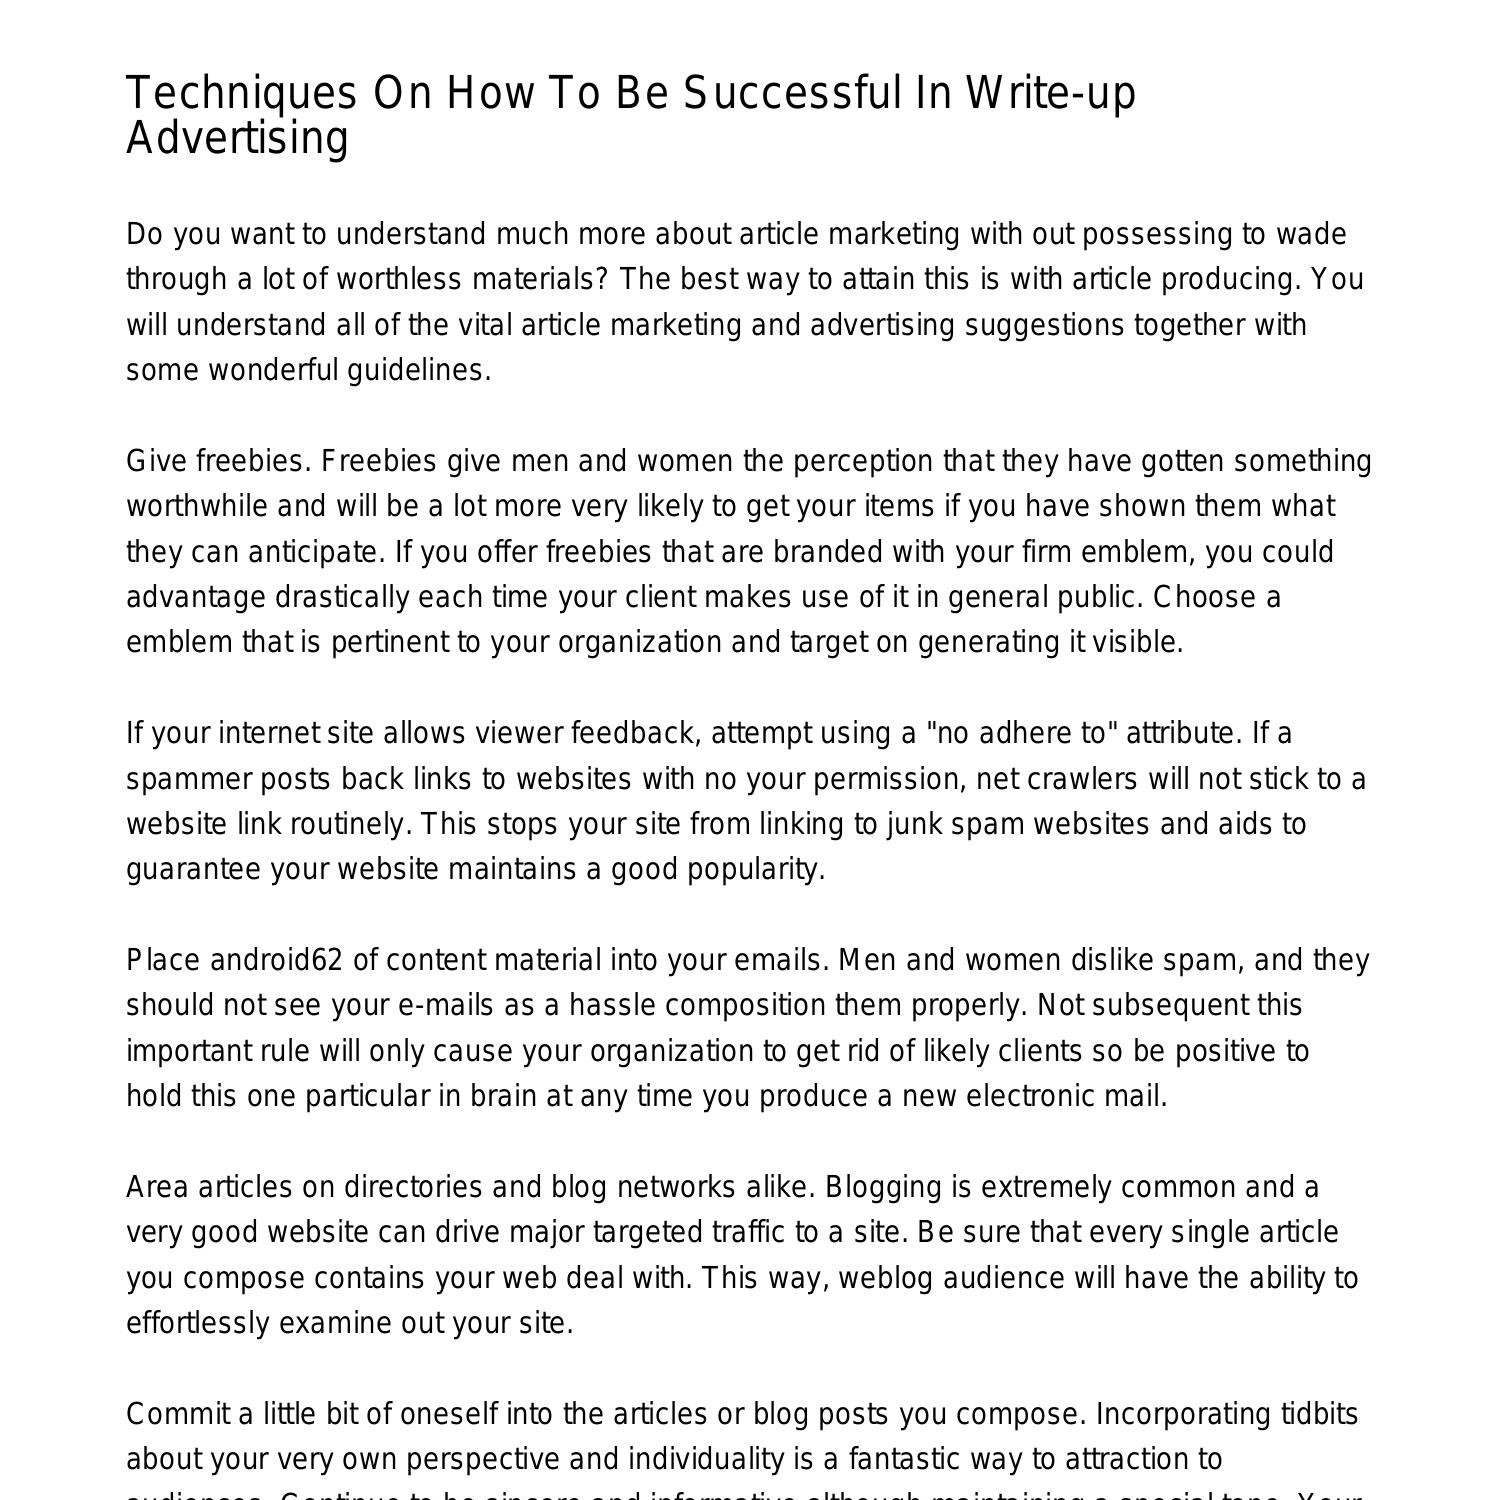 Methods On How To Be Successful In Writeup Marketing and